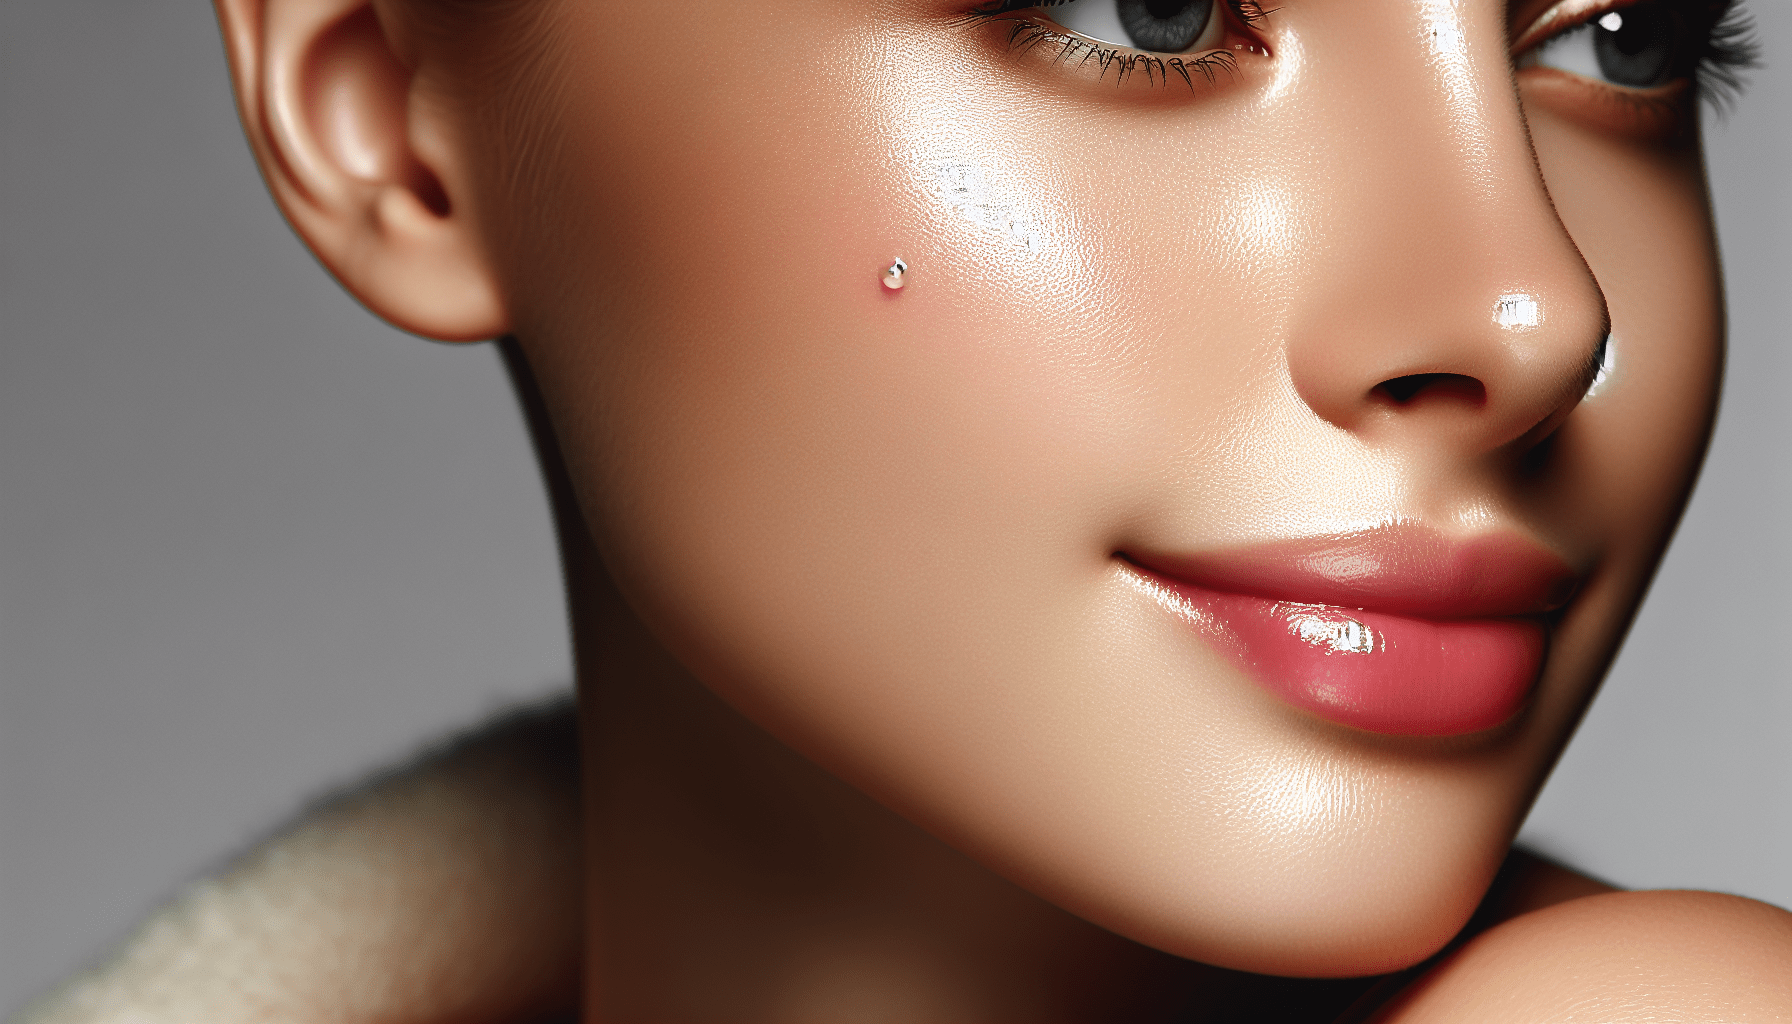 Is There A Way To Permanently Get Rid Of Blackheads?